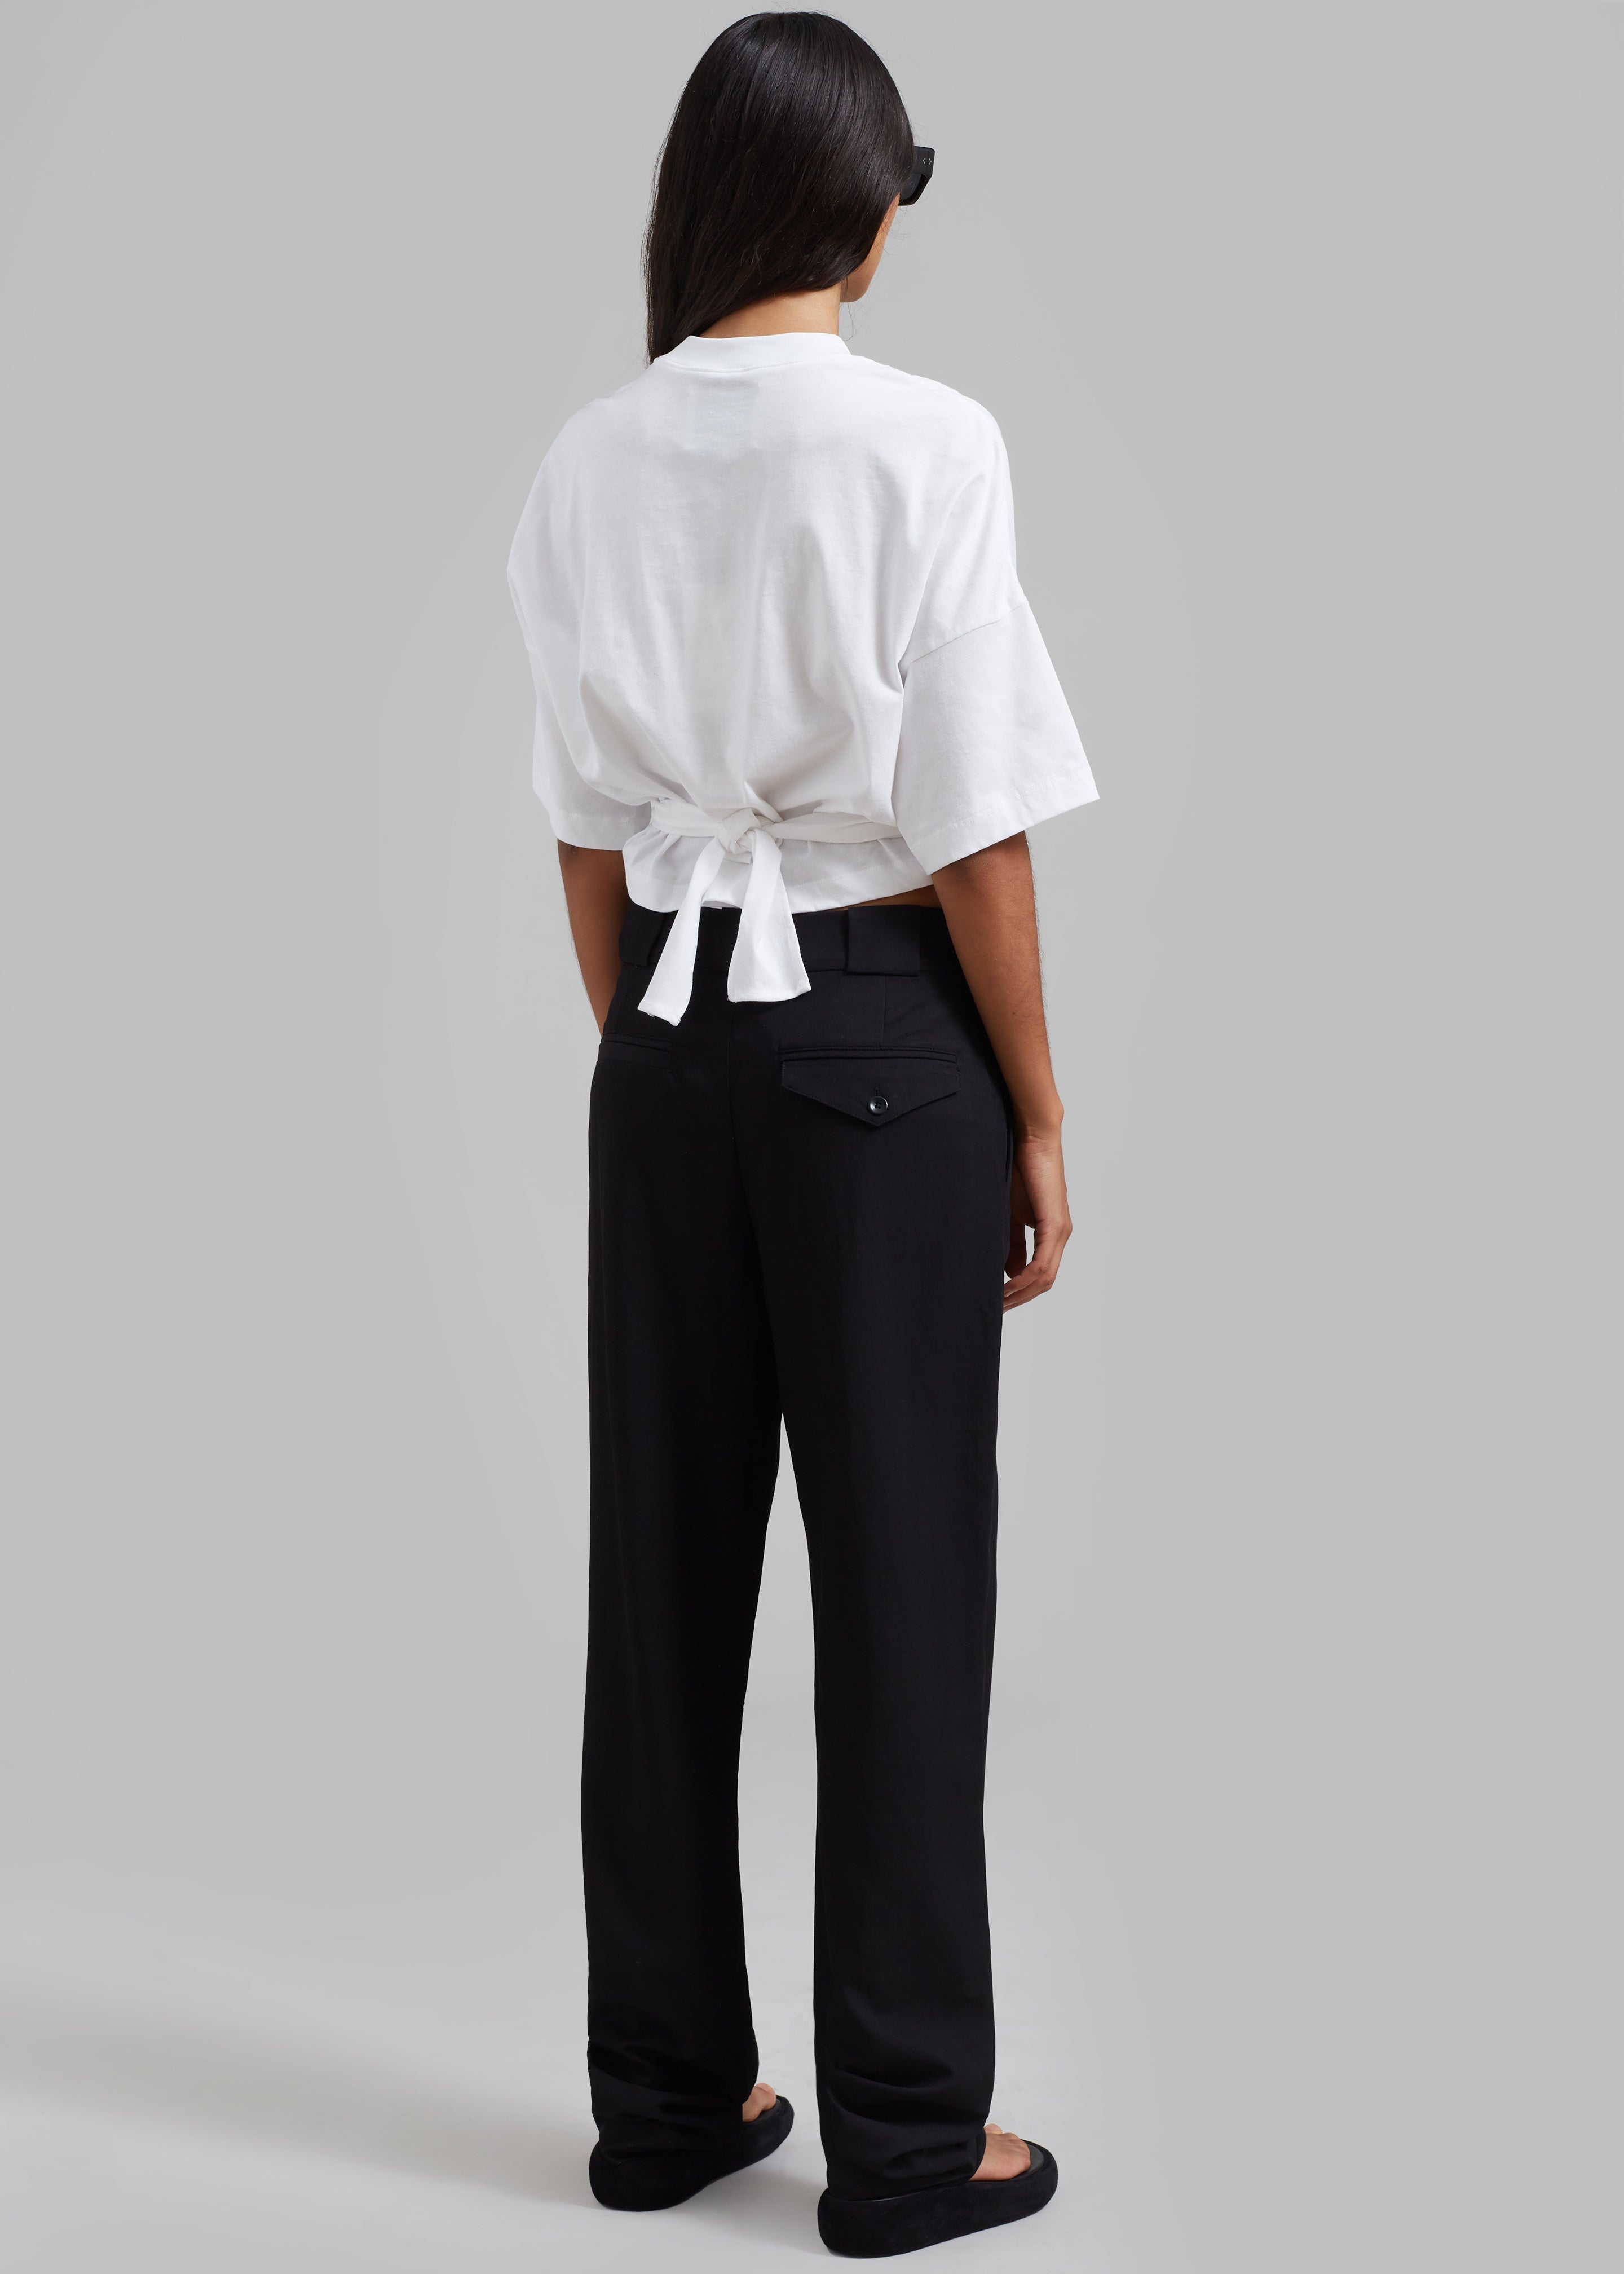 Proenza Schouler White Label Drapey Suiting Trousers - Black - 5